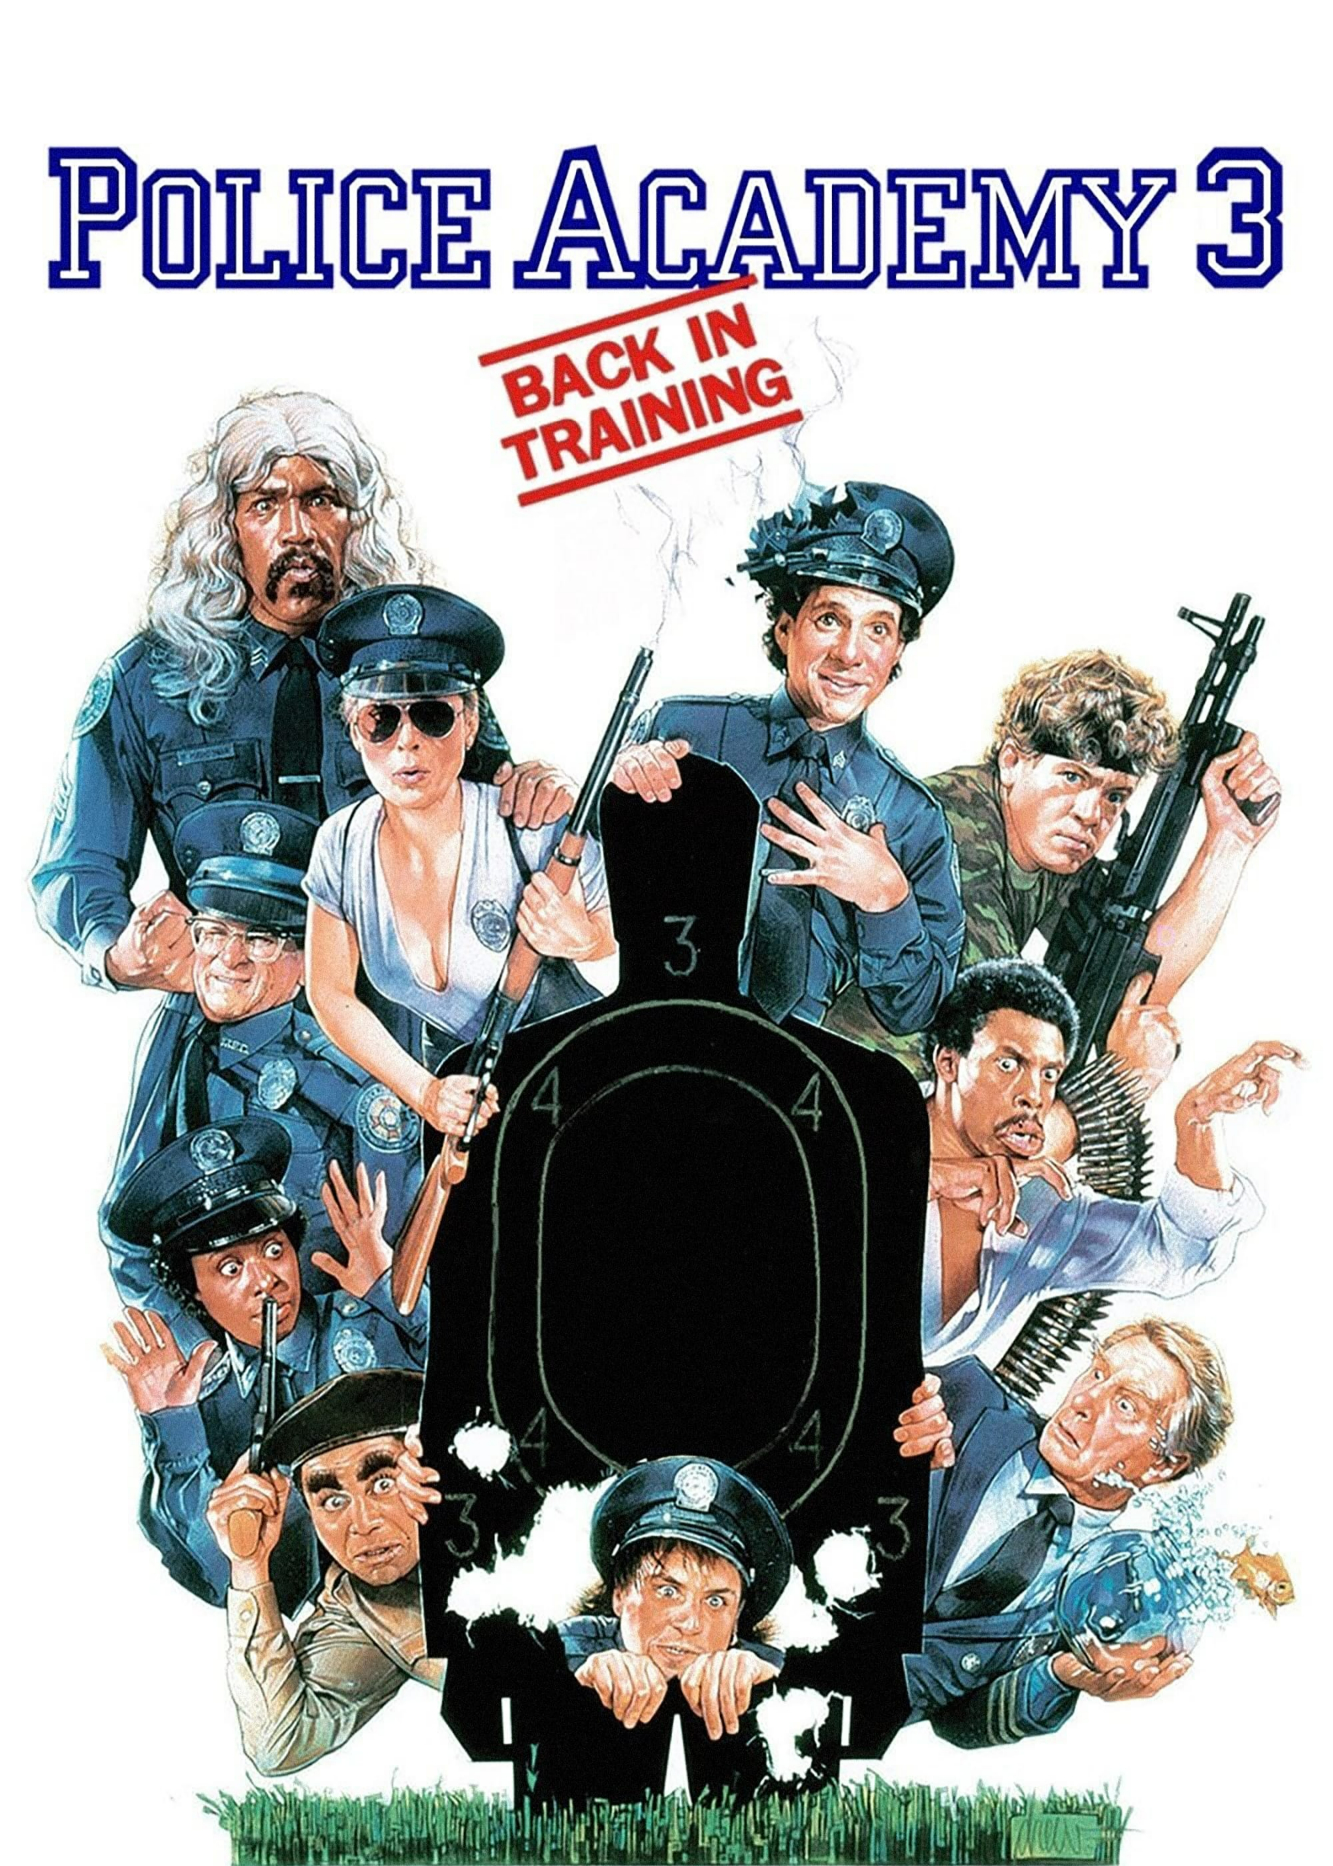 Poster Phim Police Academy 3: Back in Training (Police Academy 3: Back in Training)